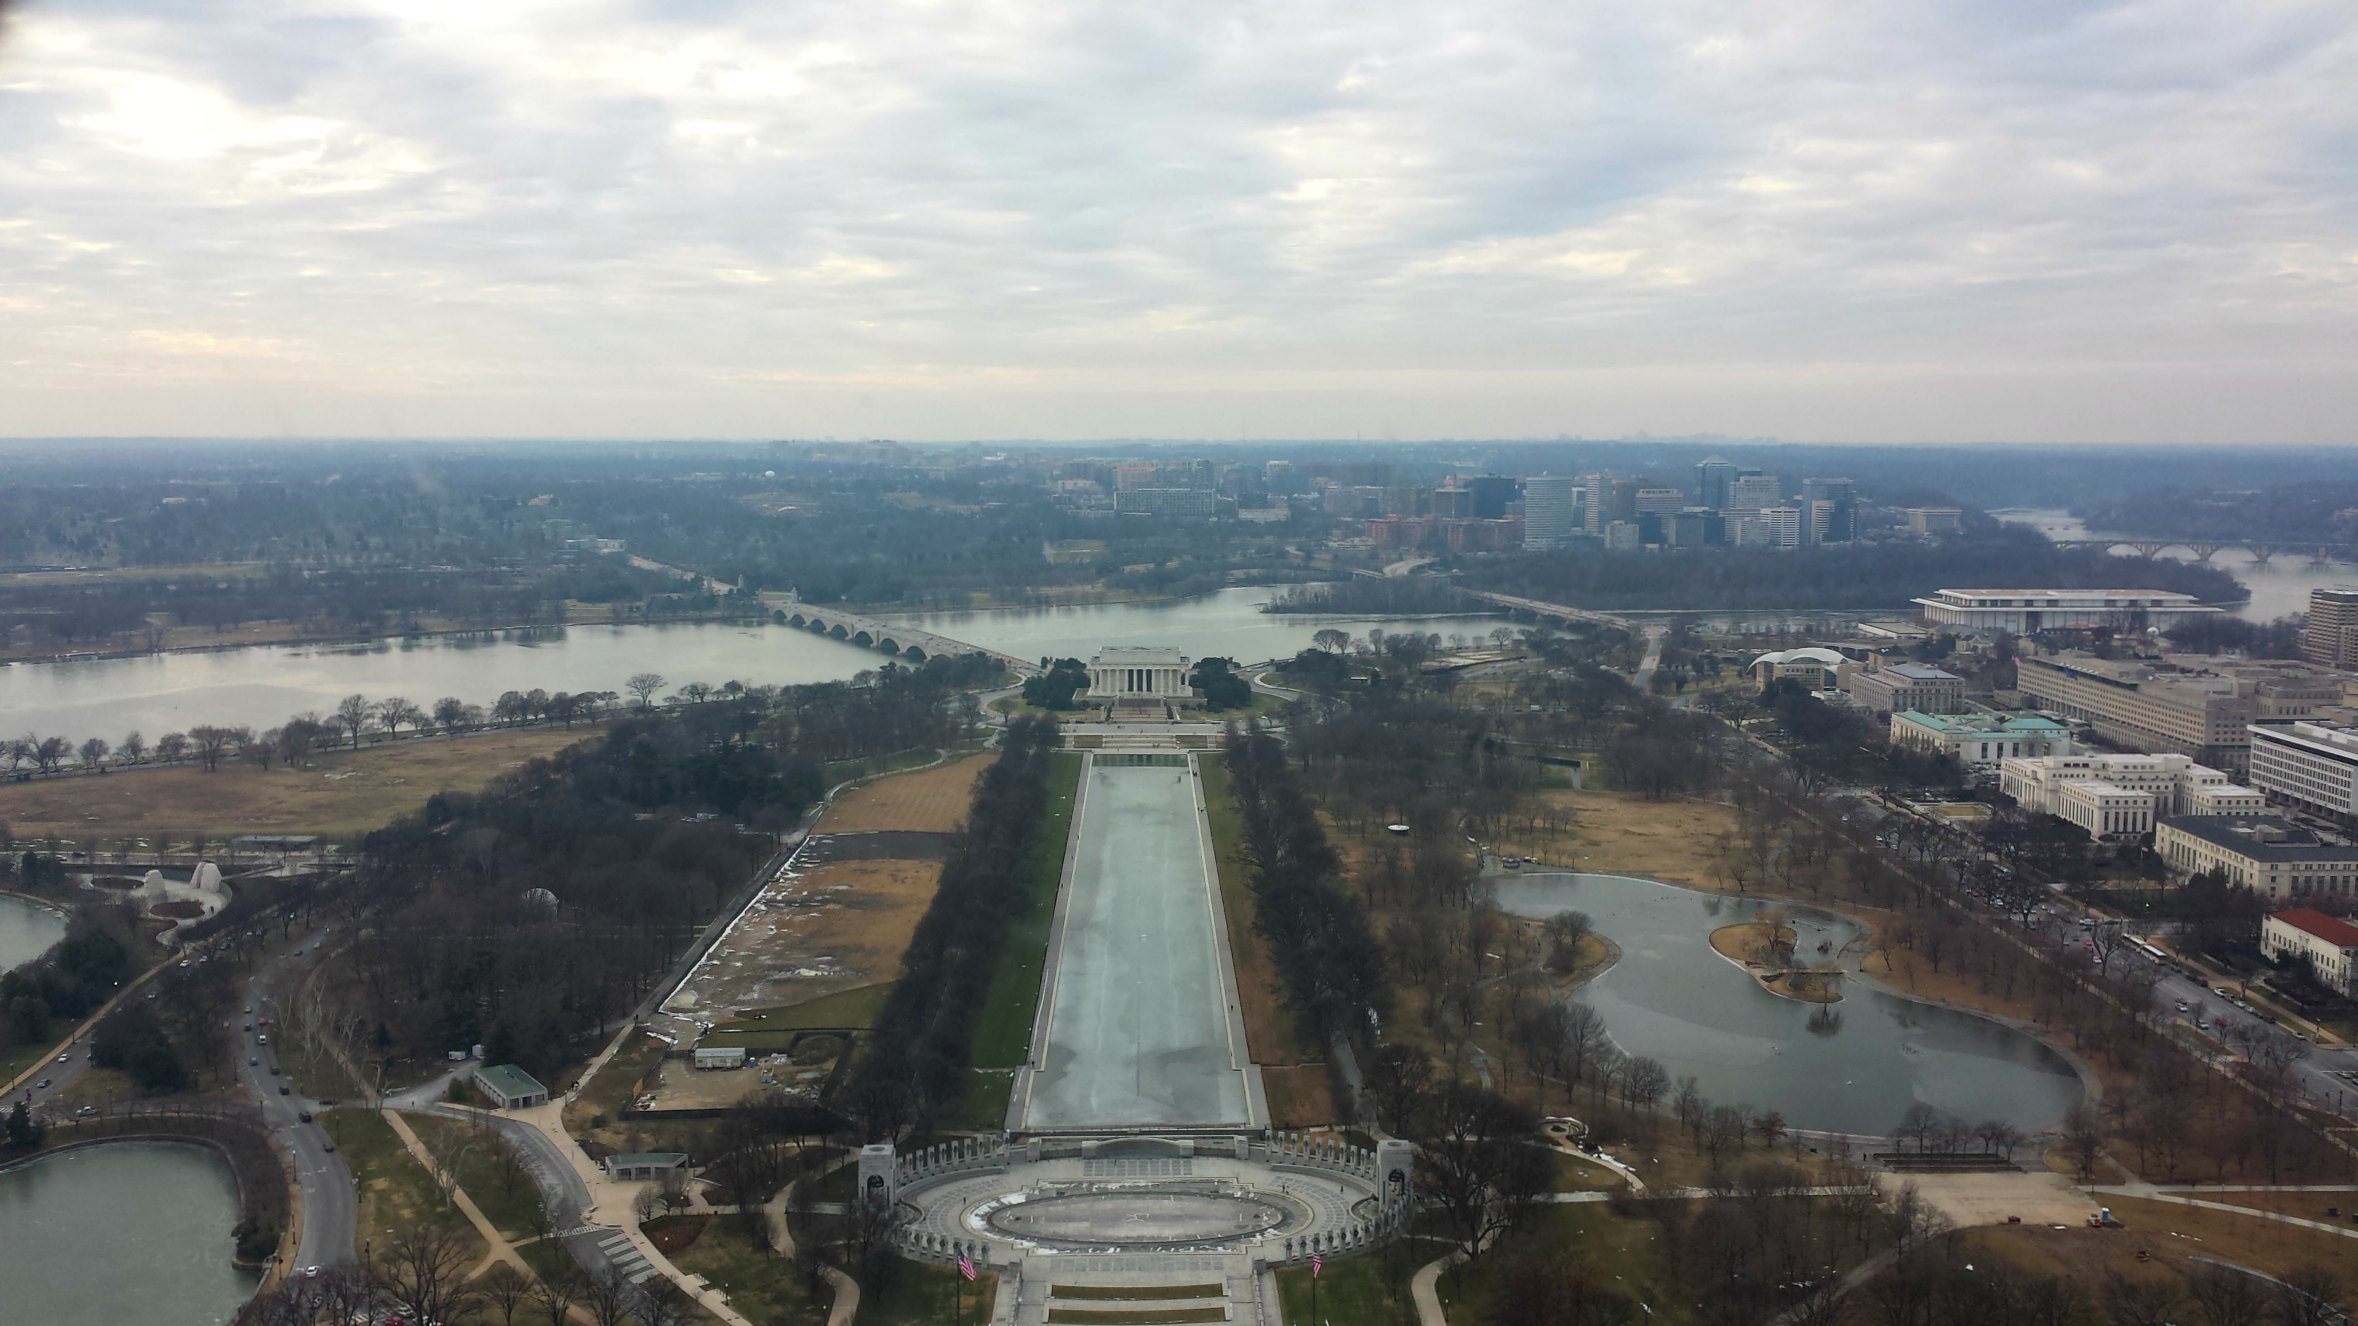 View of the Lincoln Memorial from the Washington Monument in the National Mall, Washington DC